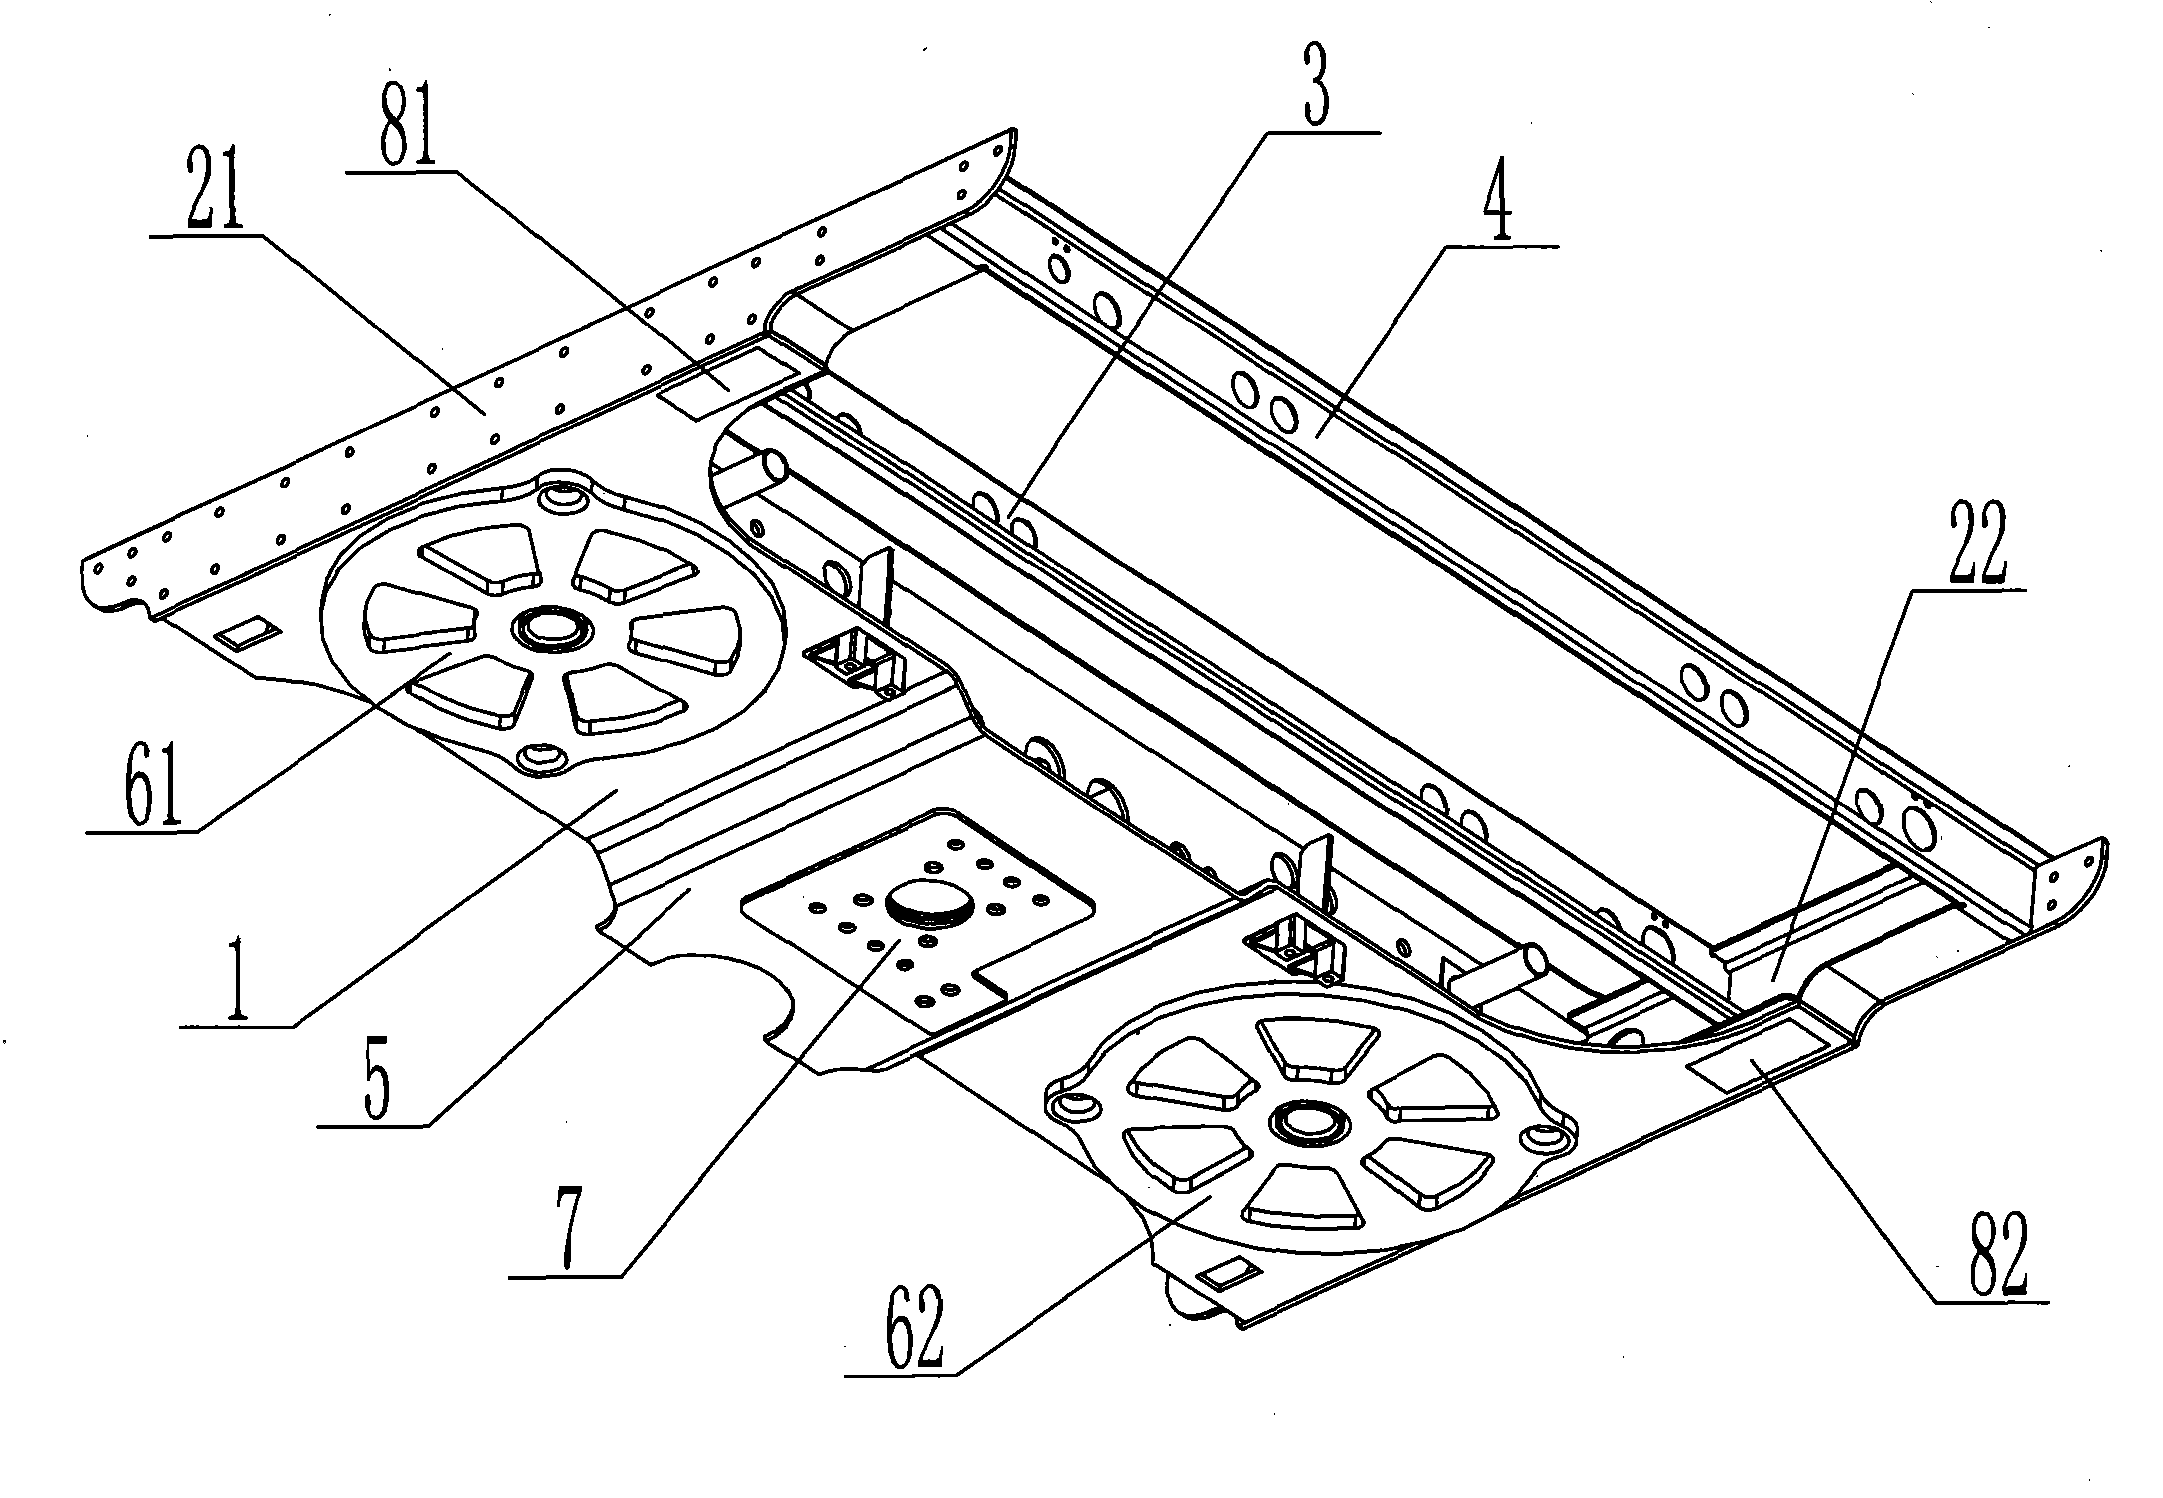 Process for producing modular sleeper beam for railway carriage